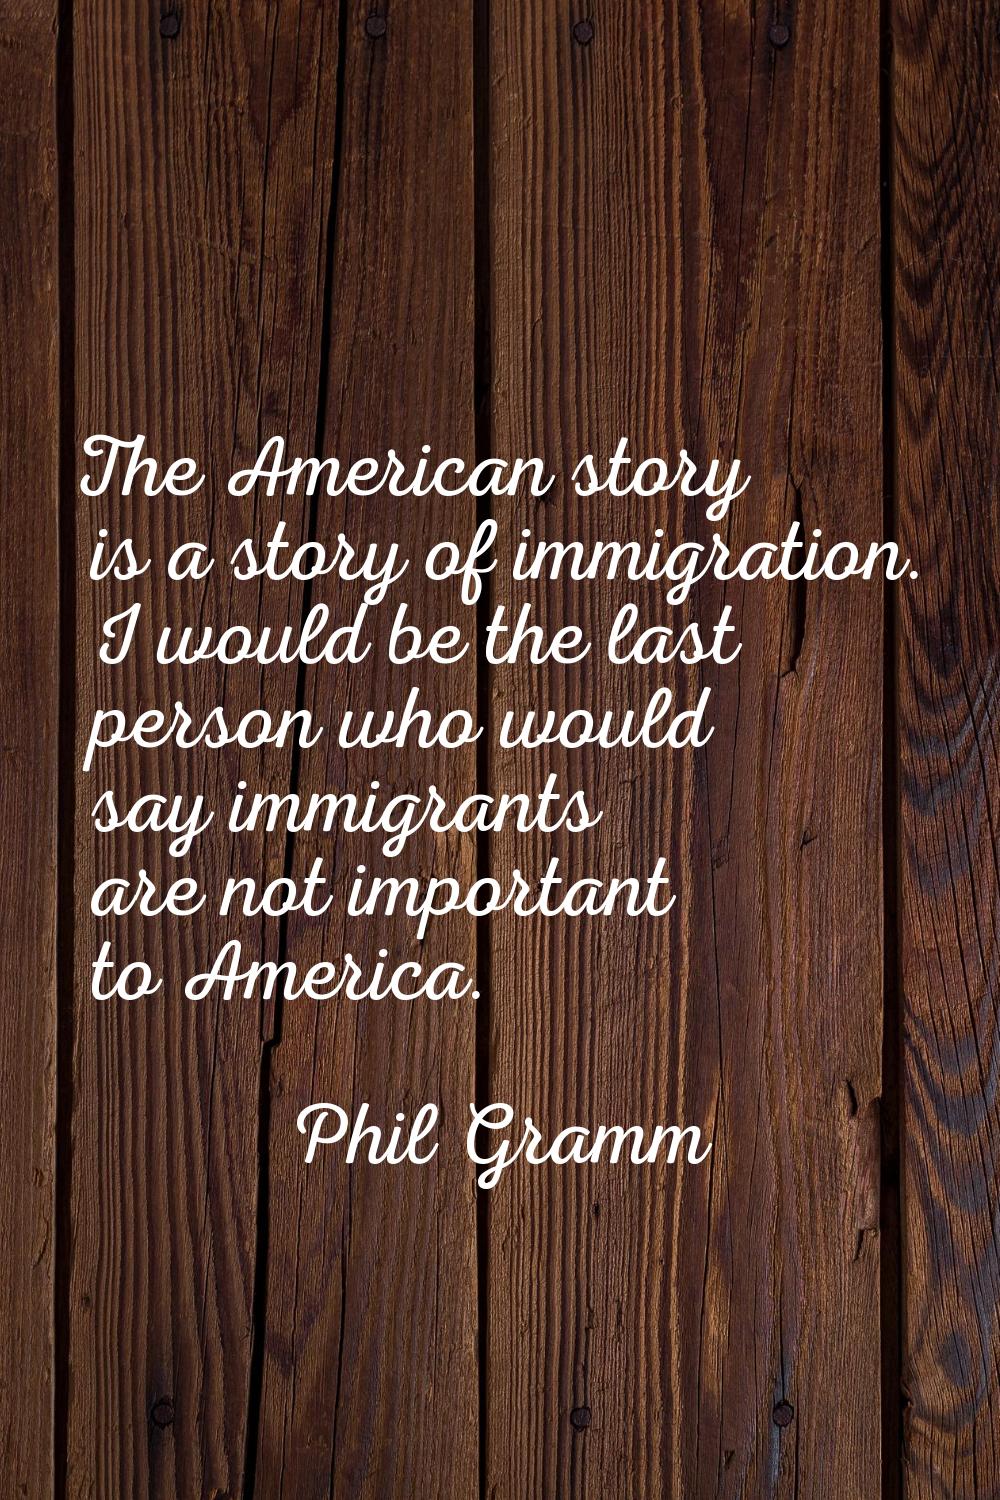 The American story is a story of immigration. I would be the last person who would say immigrants a